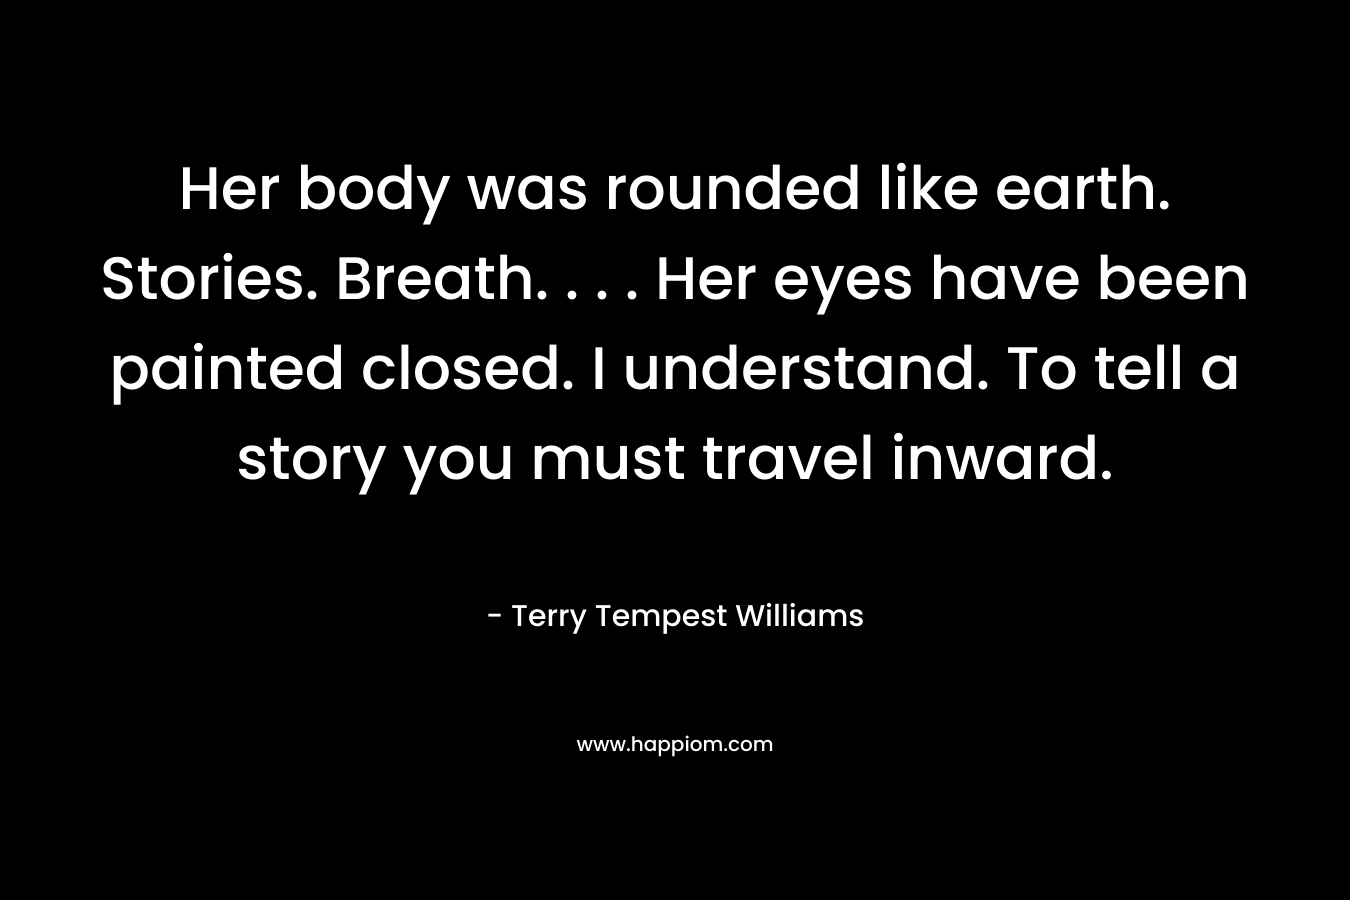 Her body was rounded like earth. Stories. Breath. . . . Her eyes have been painted closed. I understand. To tell a story you must travel inward.